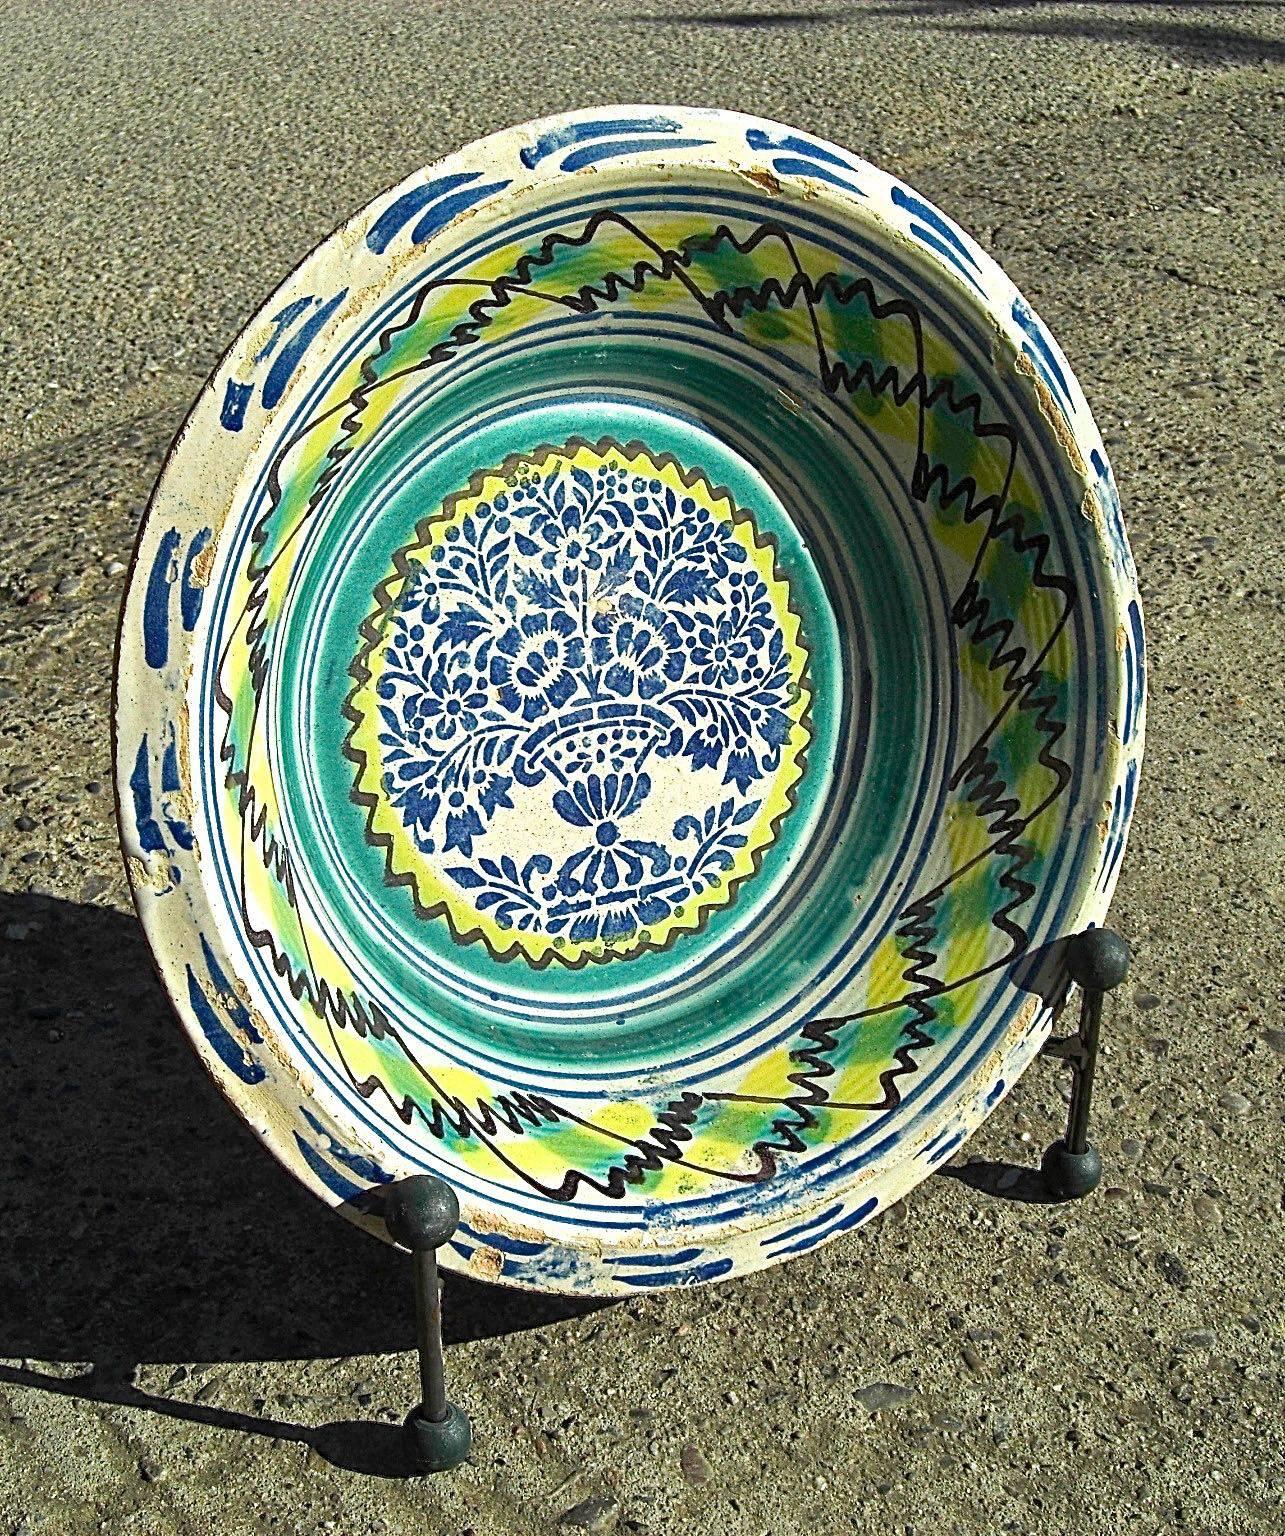 A lovely 19th century painted wash basin from the gypsy quarter of Triana in Seville, Spain.

Called 